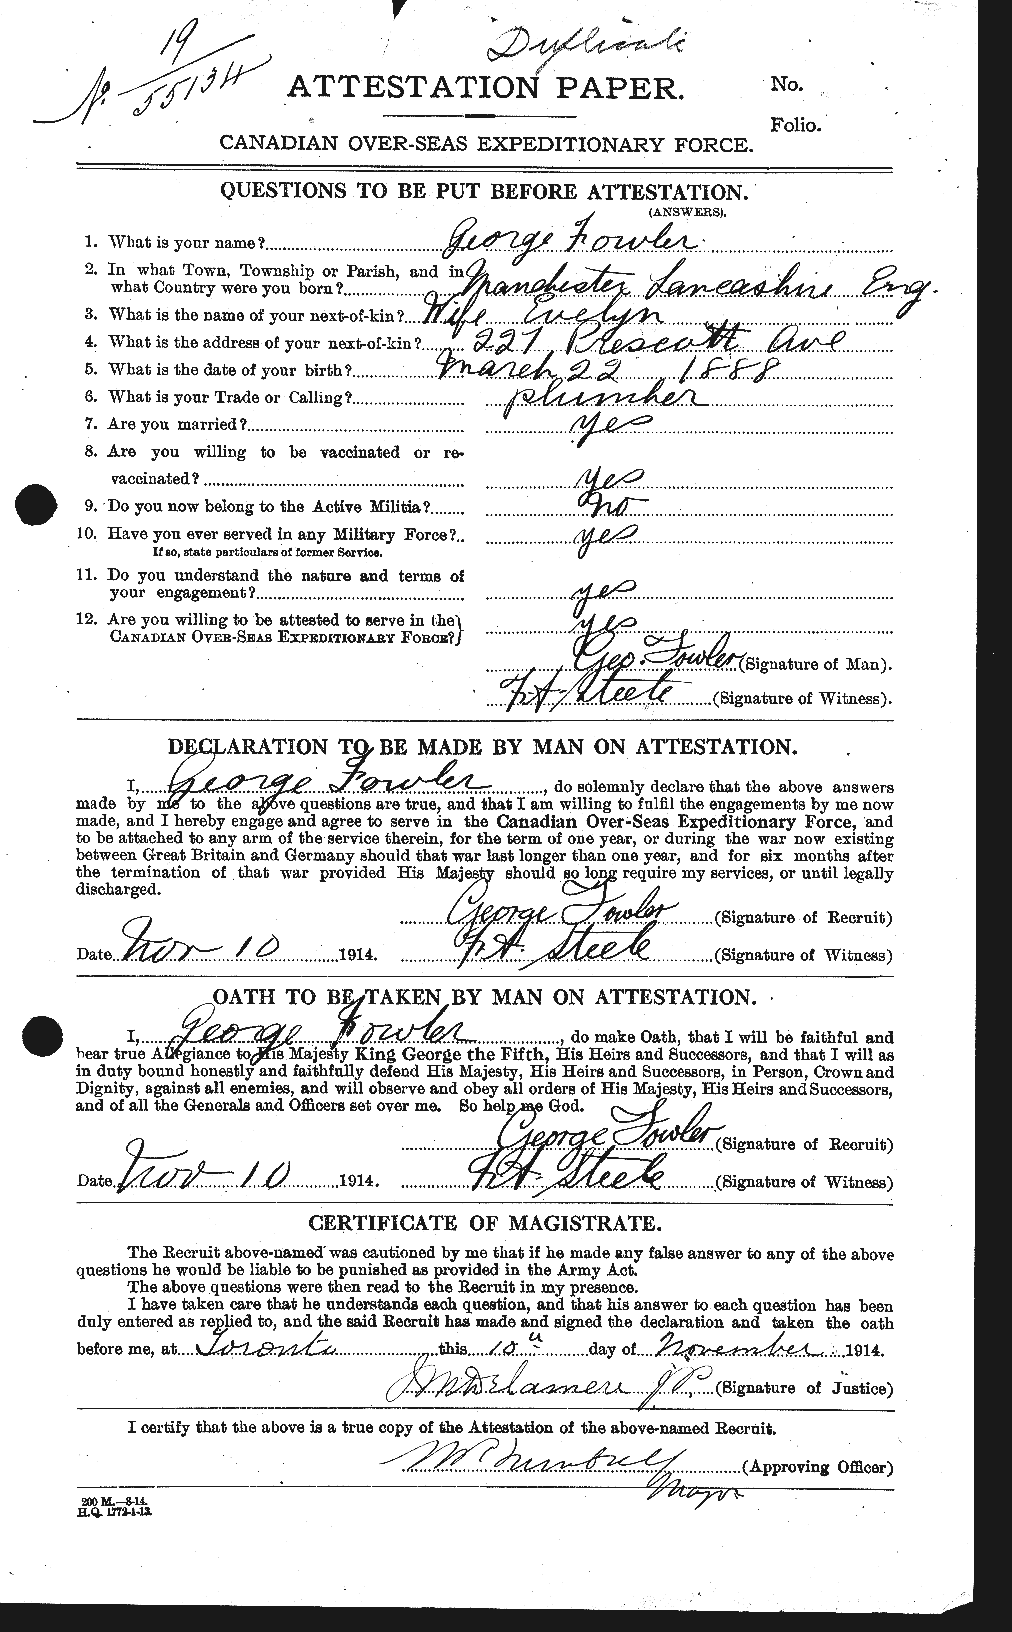 Personnel Records of the First World War - CEF 333052a